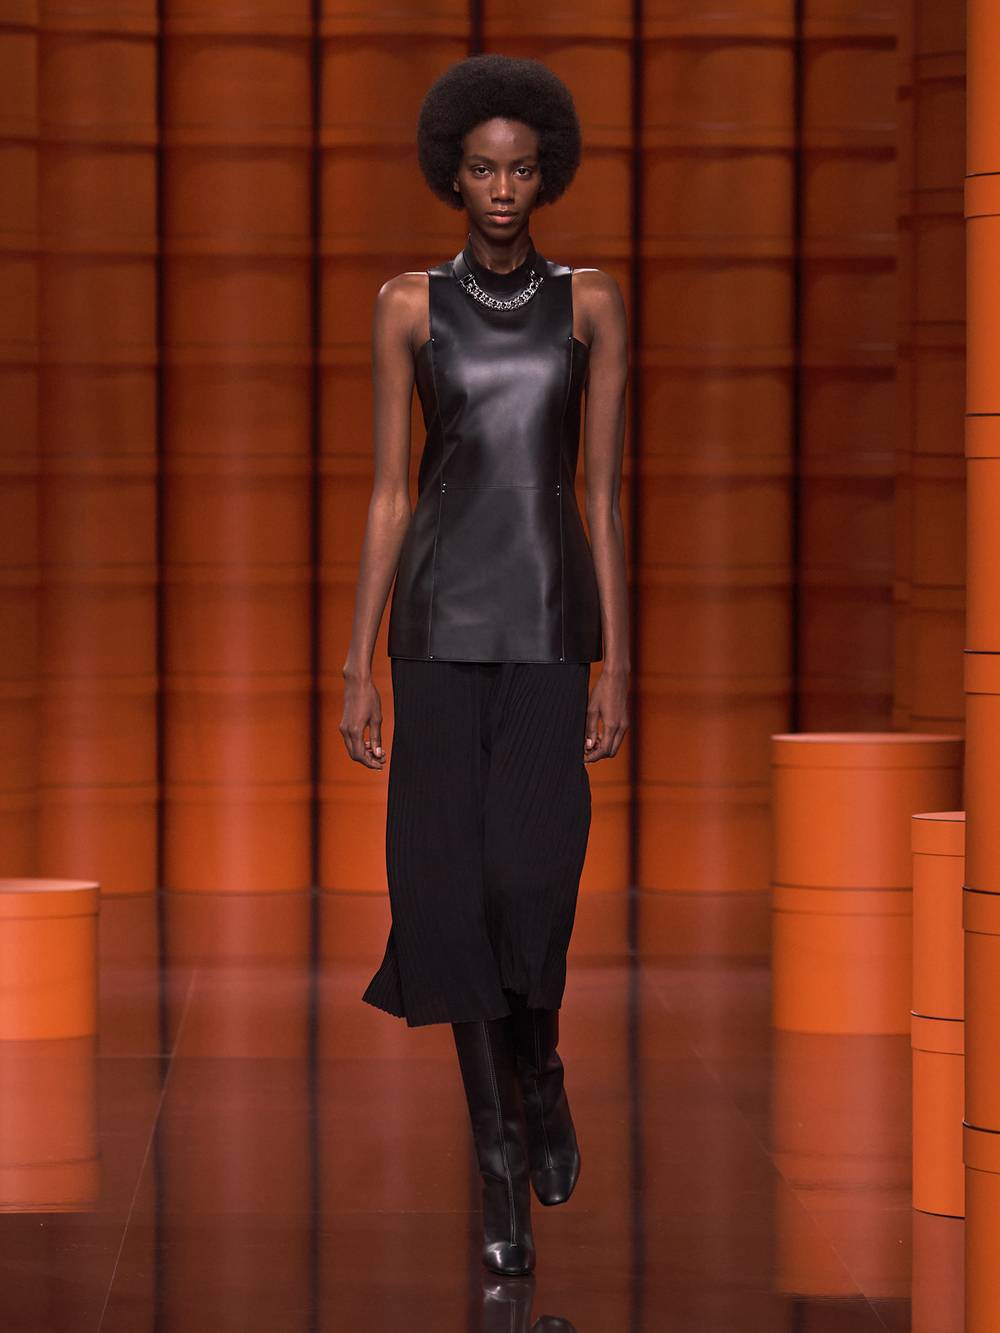 Hermès fall-winter 2021-2022: one show and two performances